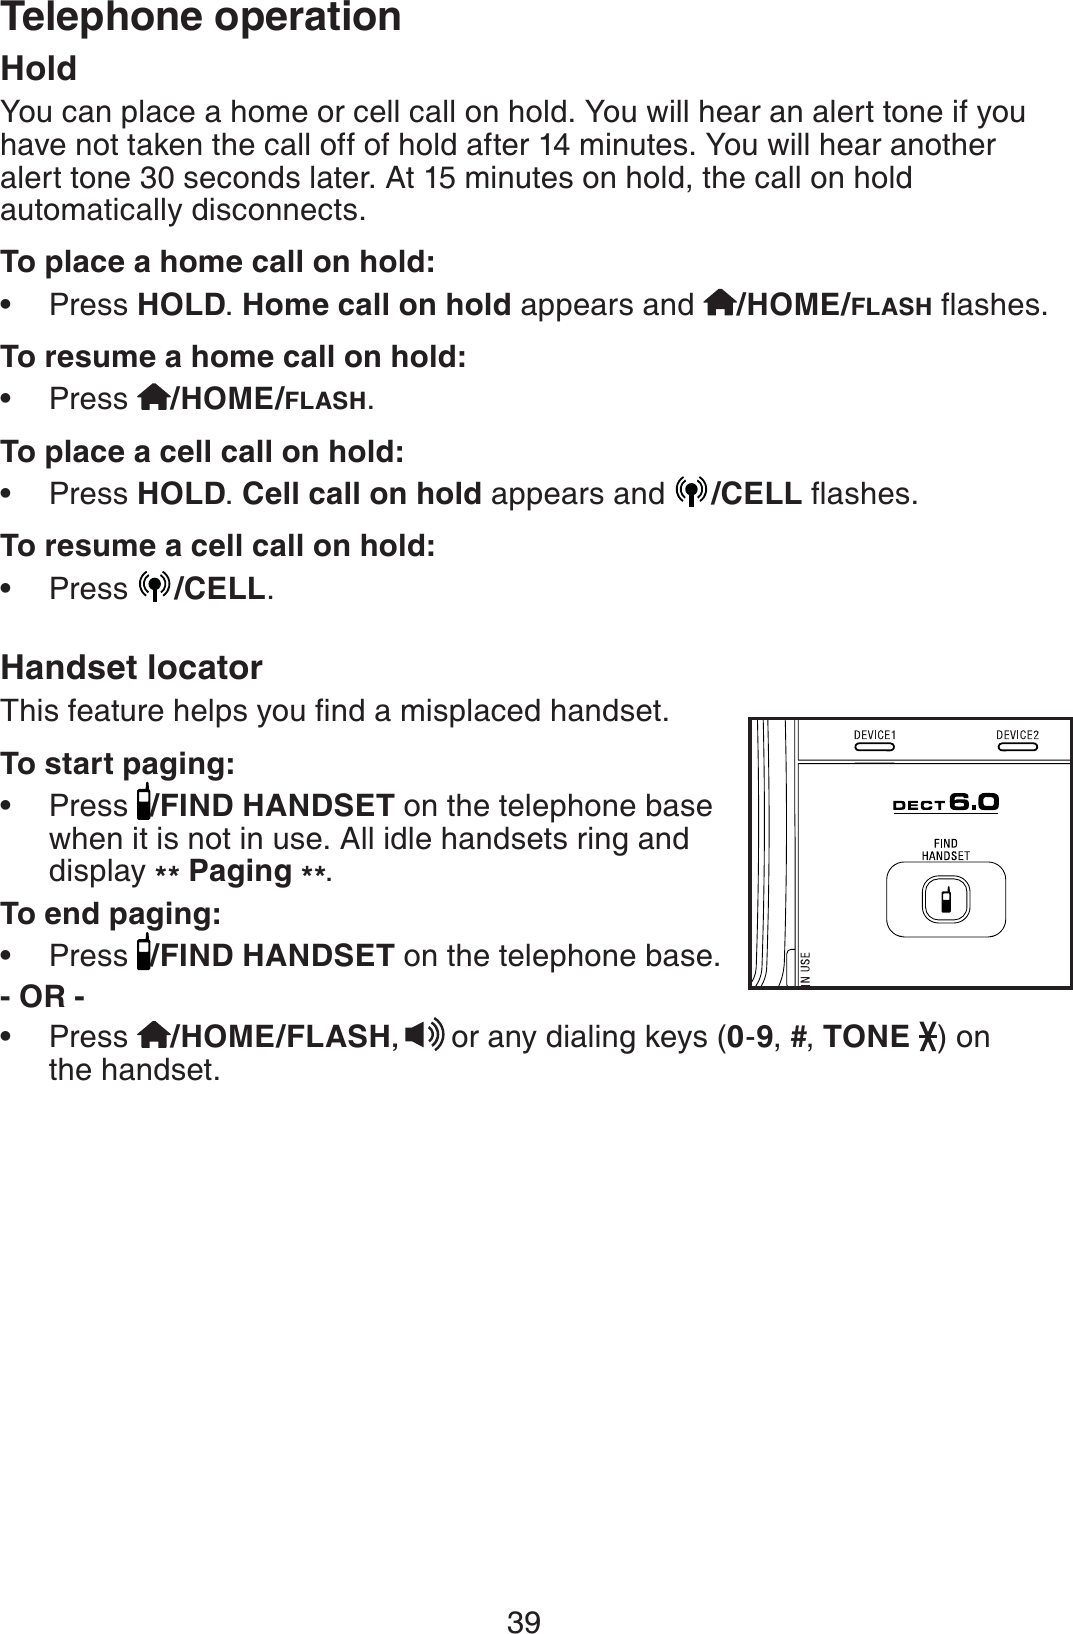 39Telephone operationHoldYou can place a home or cell call on hold. You will hear an alert tone if you have not taken the call off of hold after 14 minutes. You will hear another alert tone 30 seconds later. At 15 minutes on hold, the call on hold automatically disconnects.To place a home call on hold:Press HOLD.Home call on hold appears and /HOME/FLASHƀCUJGUTo resume a home call on hold:Press /HOME/FLASH.To place a cell call on hold:Press HOLD.Cell call on hold appears and  /CELLƀCUJGUTo resume a cell call on hold:Press  /CELL.Handset locator6JKUHGCVWTGJGNRU[QWſPFCOKURNCEGFJCPFUGVTo start paging:Press  /FIND HANDSET on the telephone base when it is not in use. All idle handsets ring and display ** Paging **.To end paging:Press  /FIND HANDSET on the telephone base.- OR -Press  /HOME/FLASH,or any dialing keys (0-9,#,TONE ) on the handset.•••••••